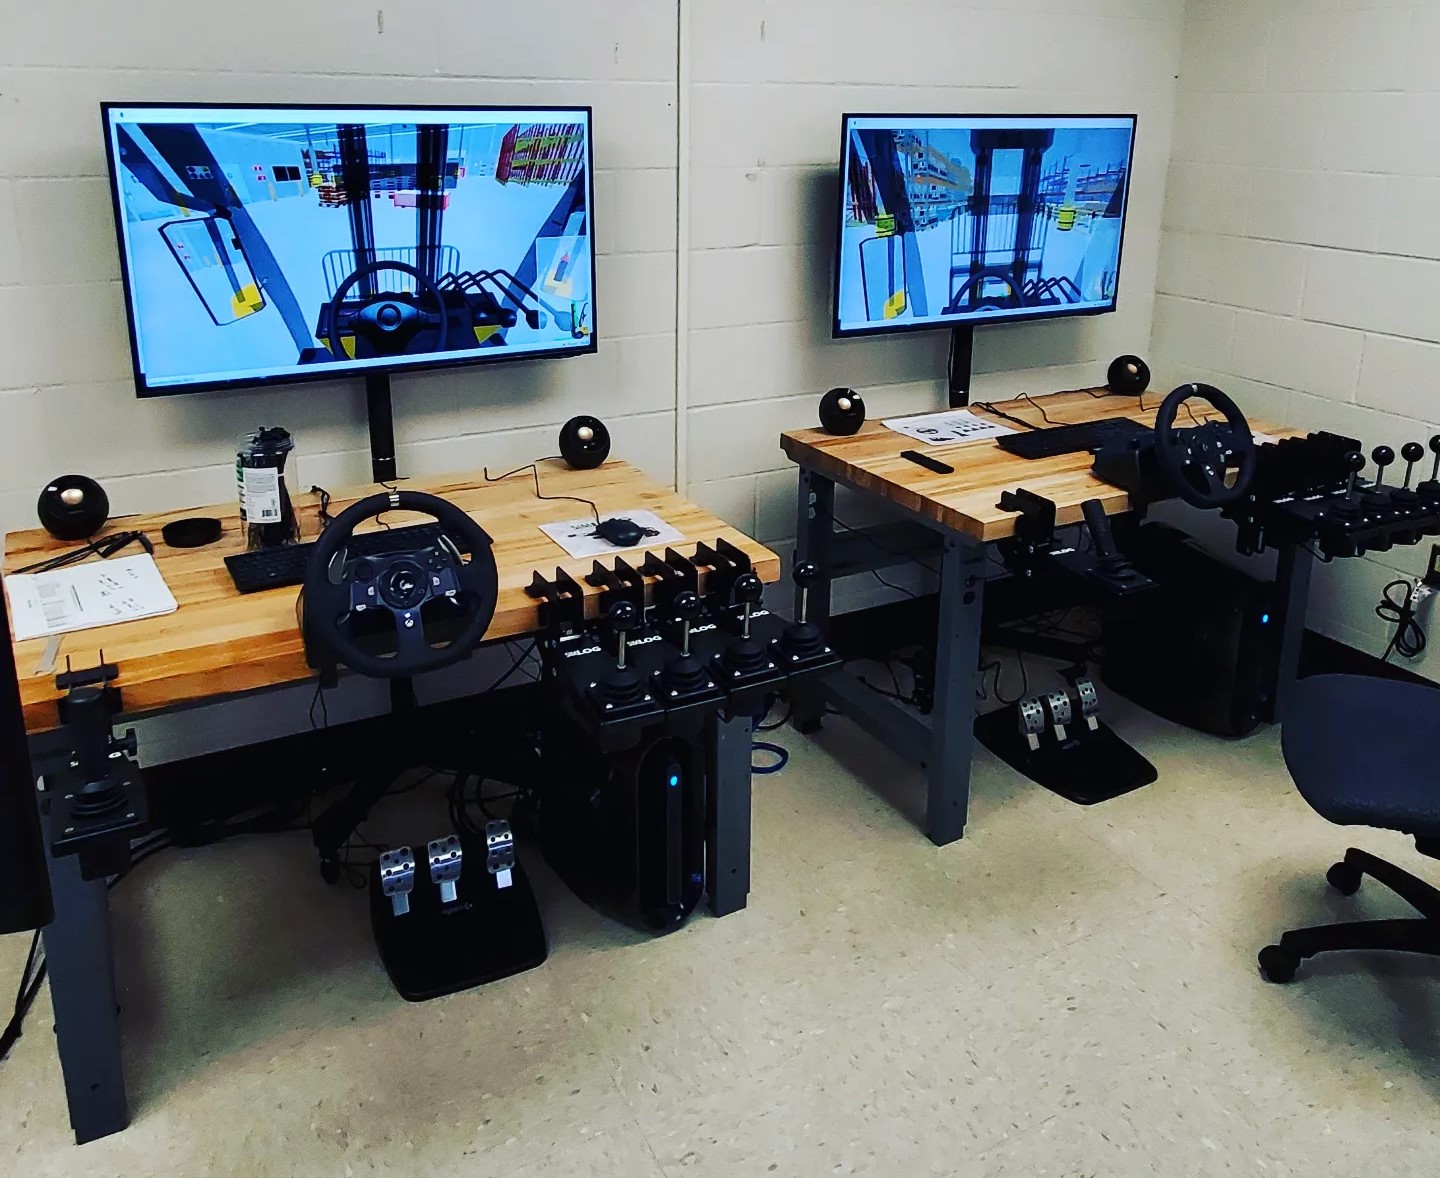 Two Forklift Personal Simulator tabletop stations